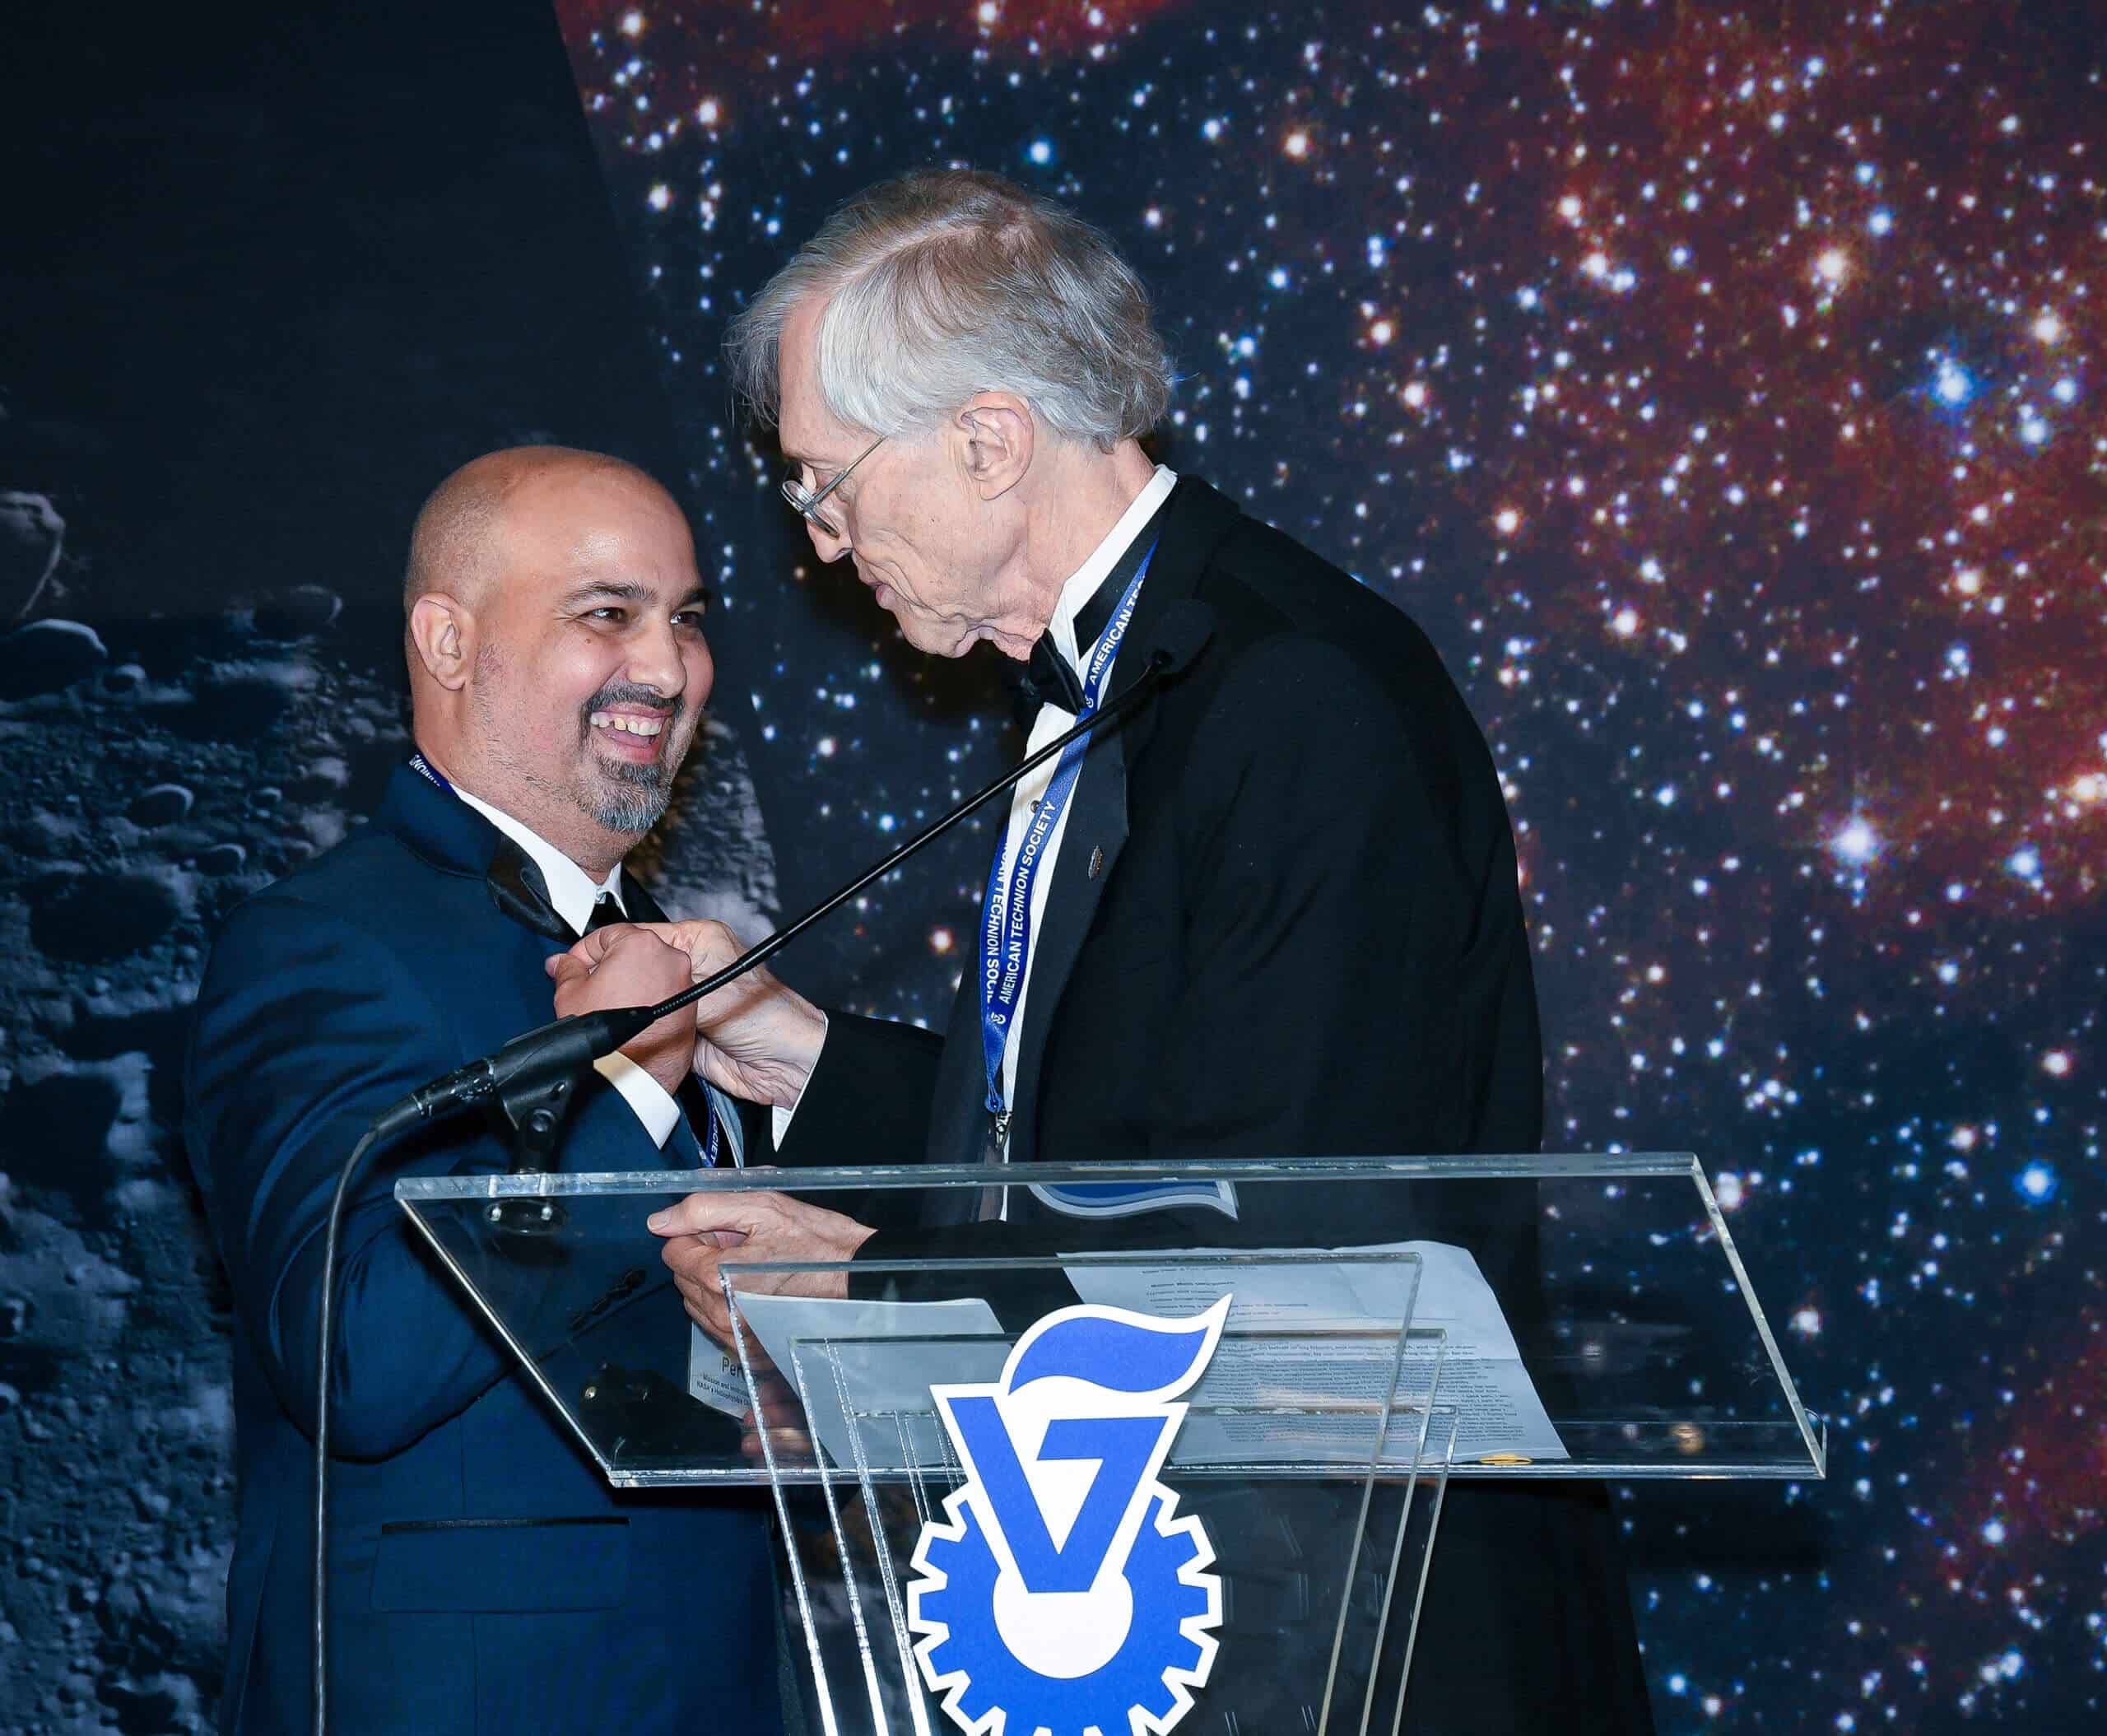 Dr. John Mather (right) presents Dr. Eliad Peretz with the NASA medal for extraordinary achievements at a ceremony of the Friends of the Technion Association in the USA. Photo: Association of Friends of the Technion in the USA (ATS)